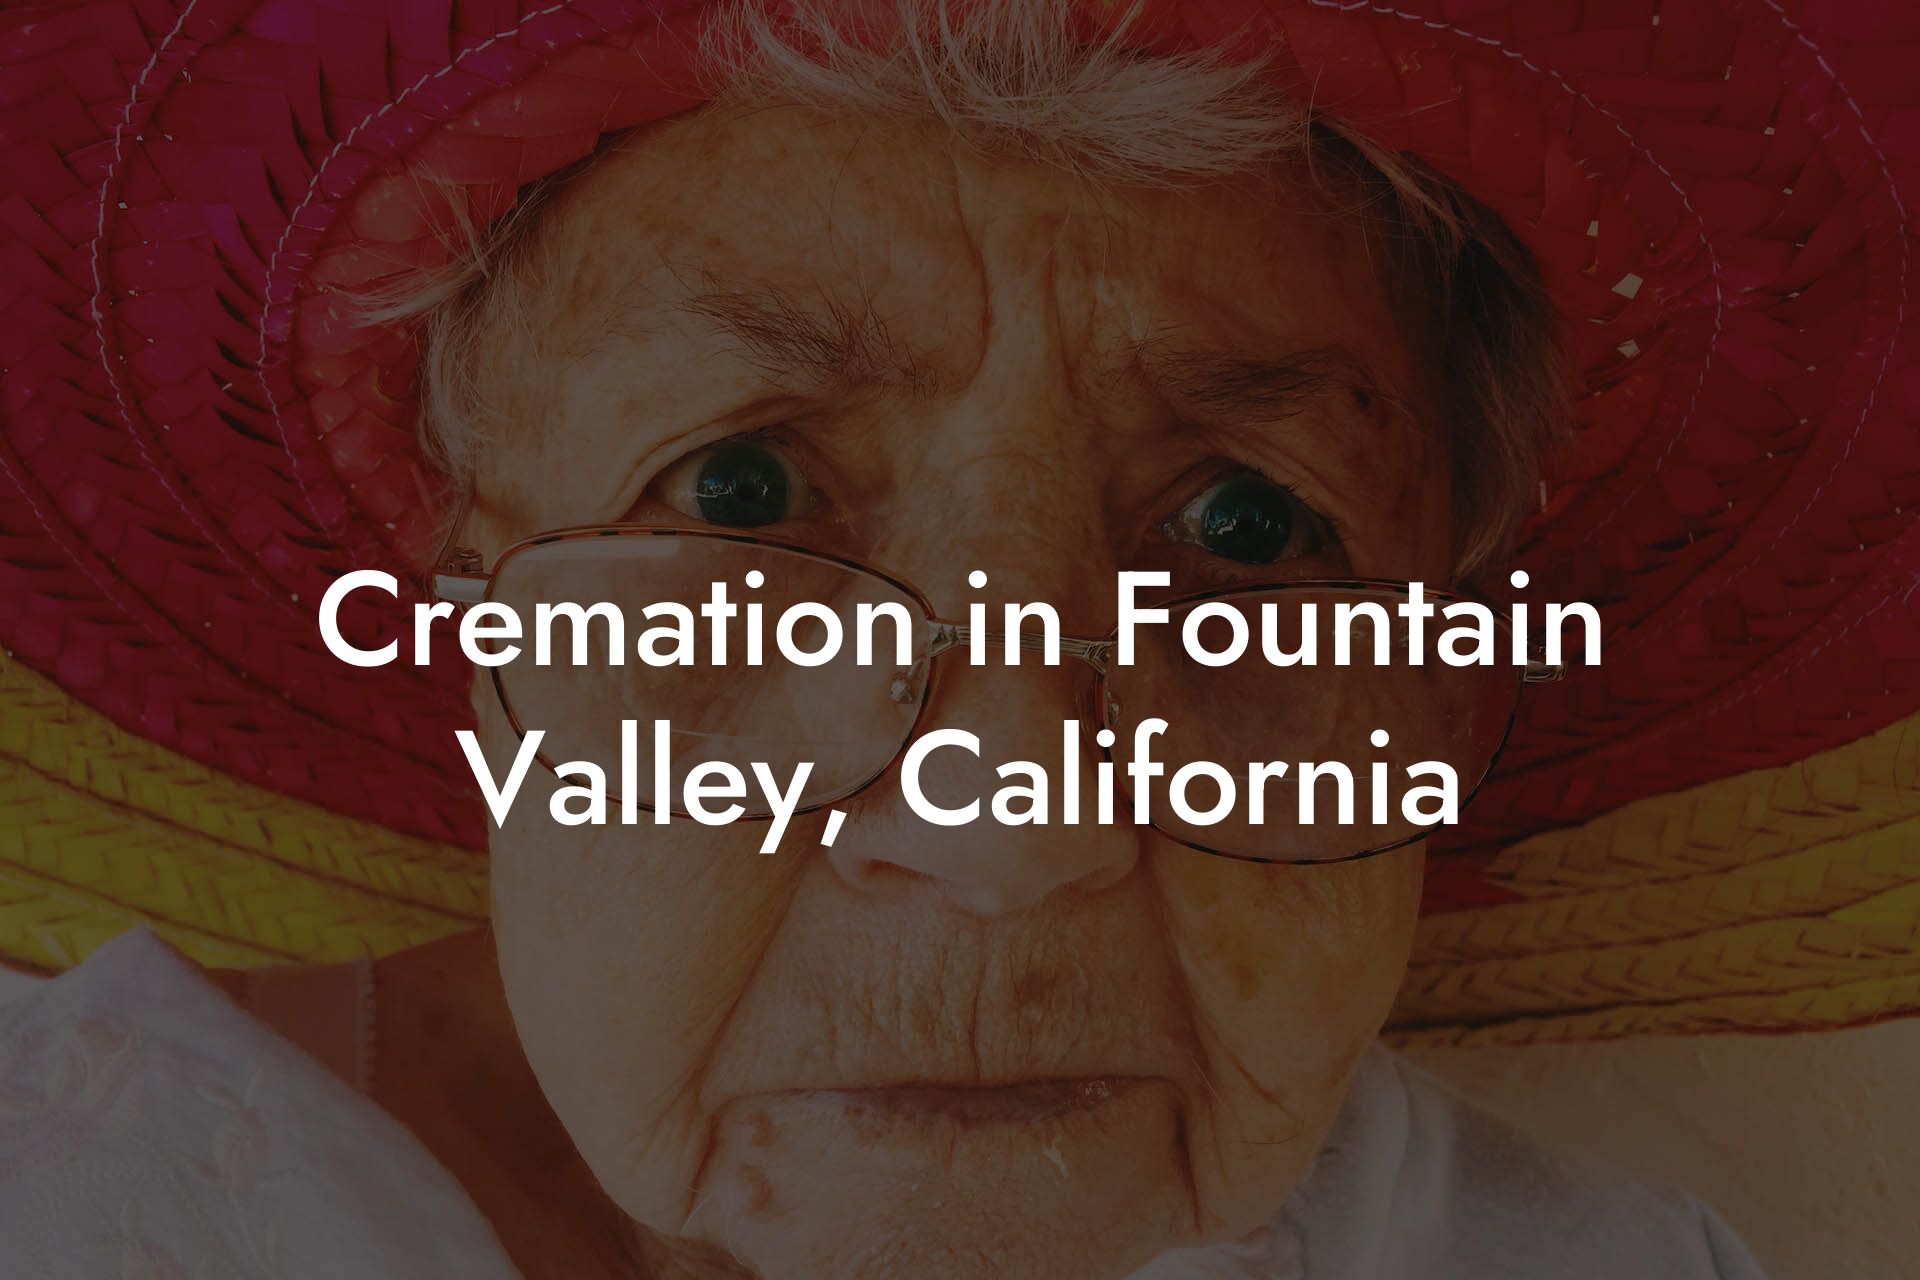 Cremation in Fountain Valley, California